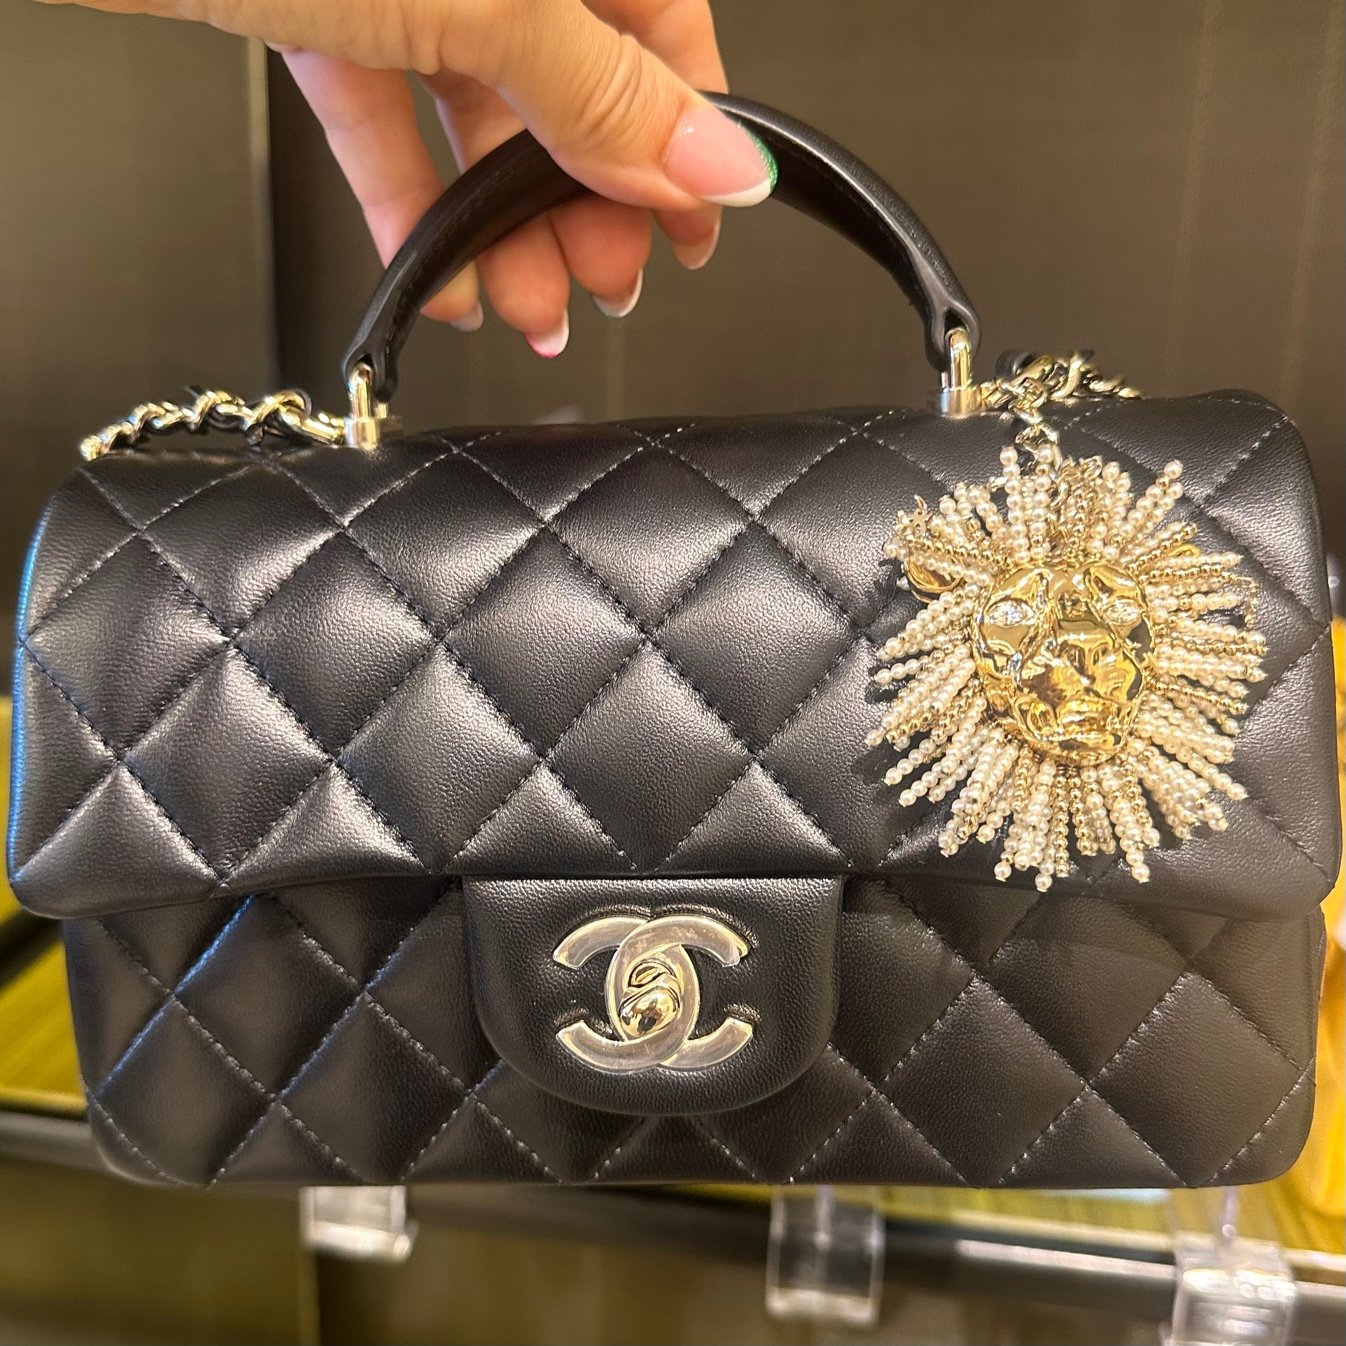 What Is The Best First Bag to Buy at Hermès and Chanel?